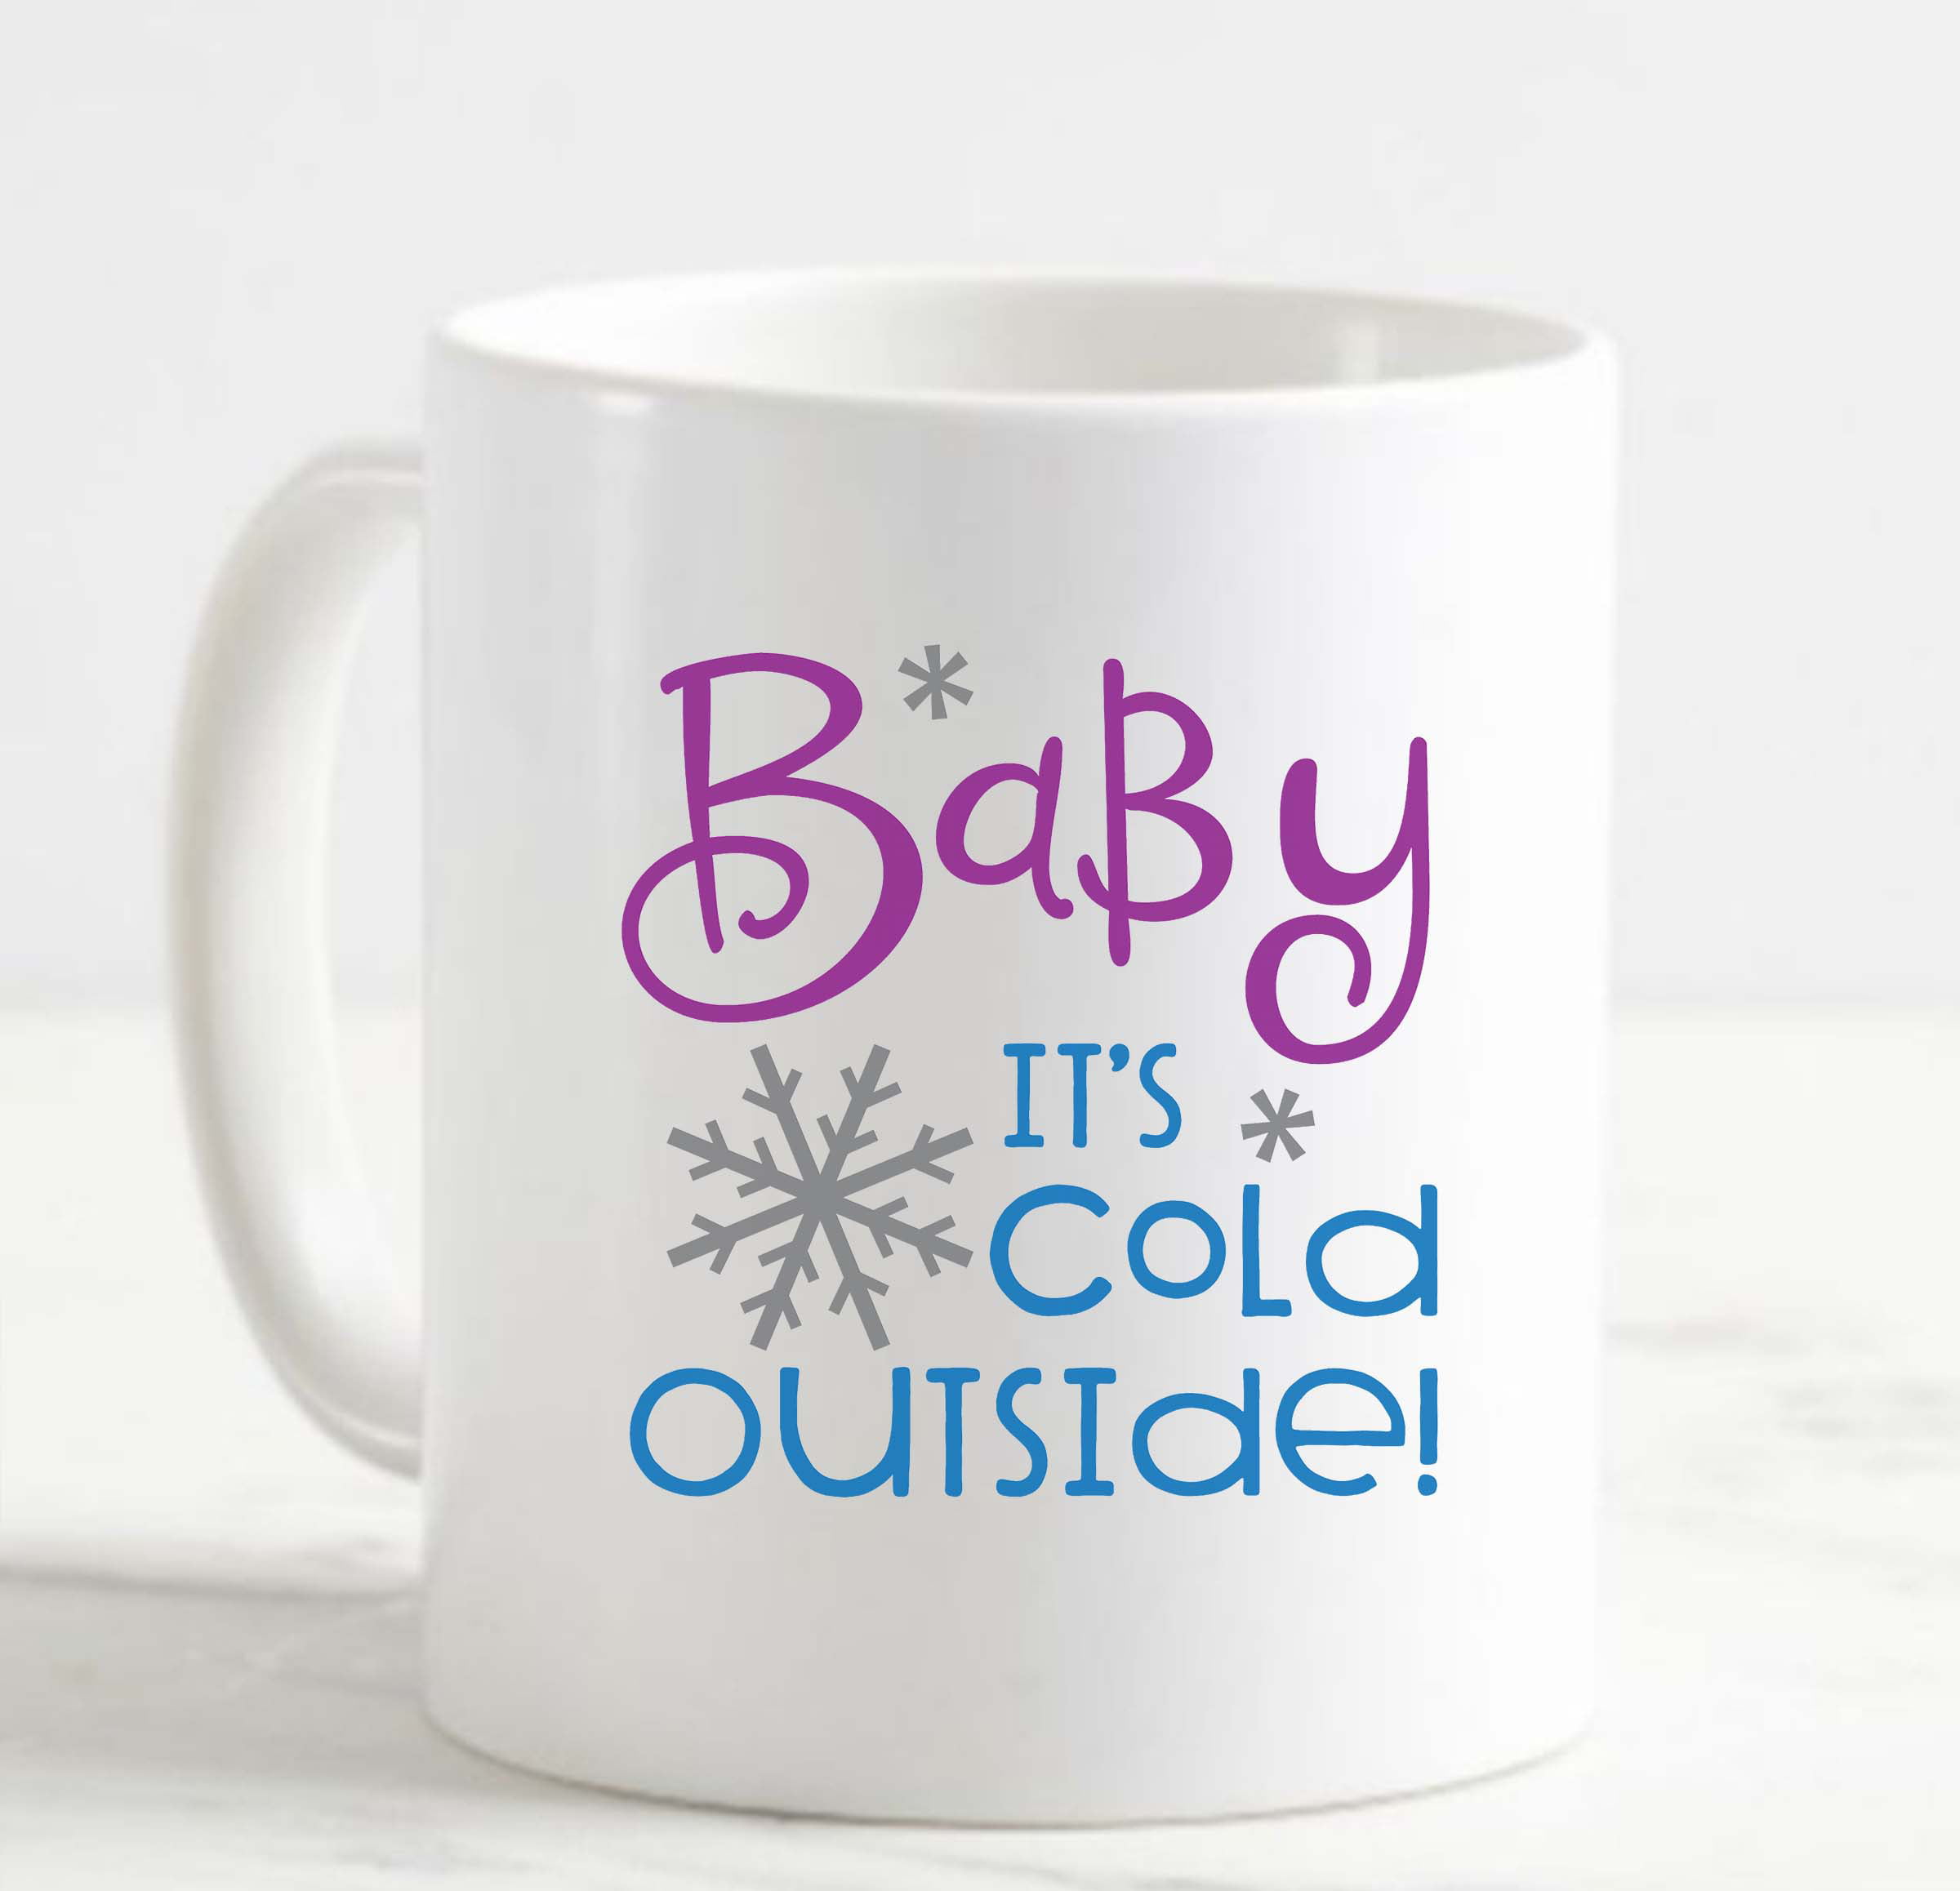 Coffee Mug Baby Its Cold Outside! Snowflakes Winter Snow Funny Chilly White  Cup Funny Gifts for work office him her 